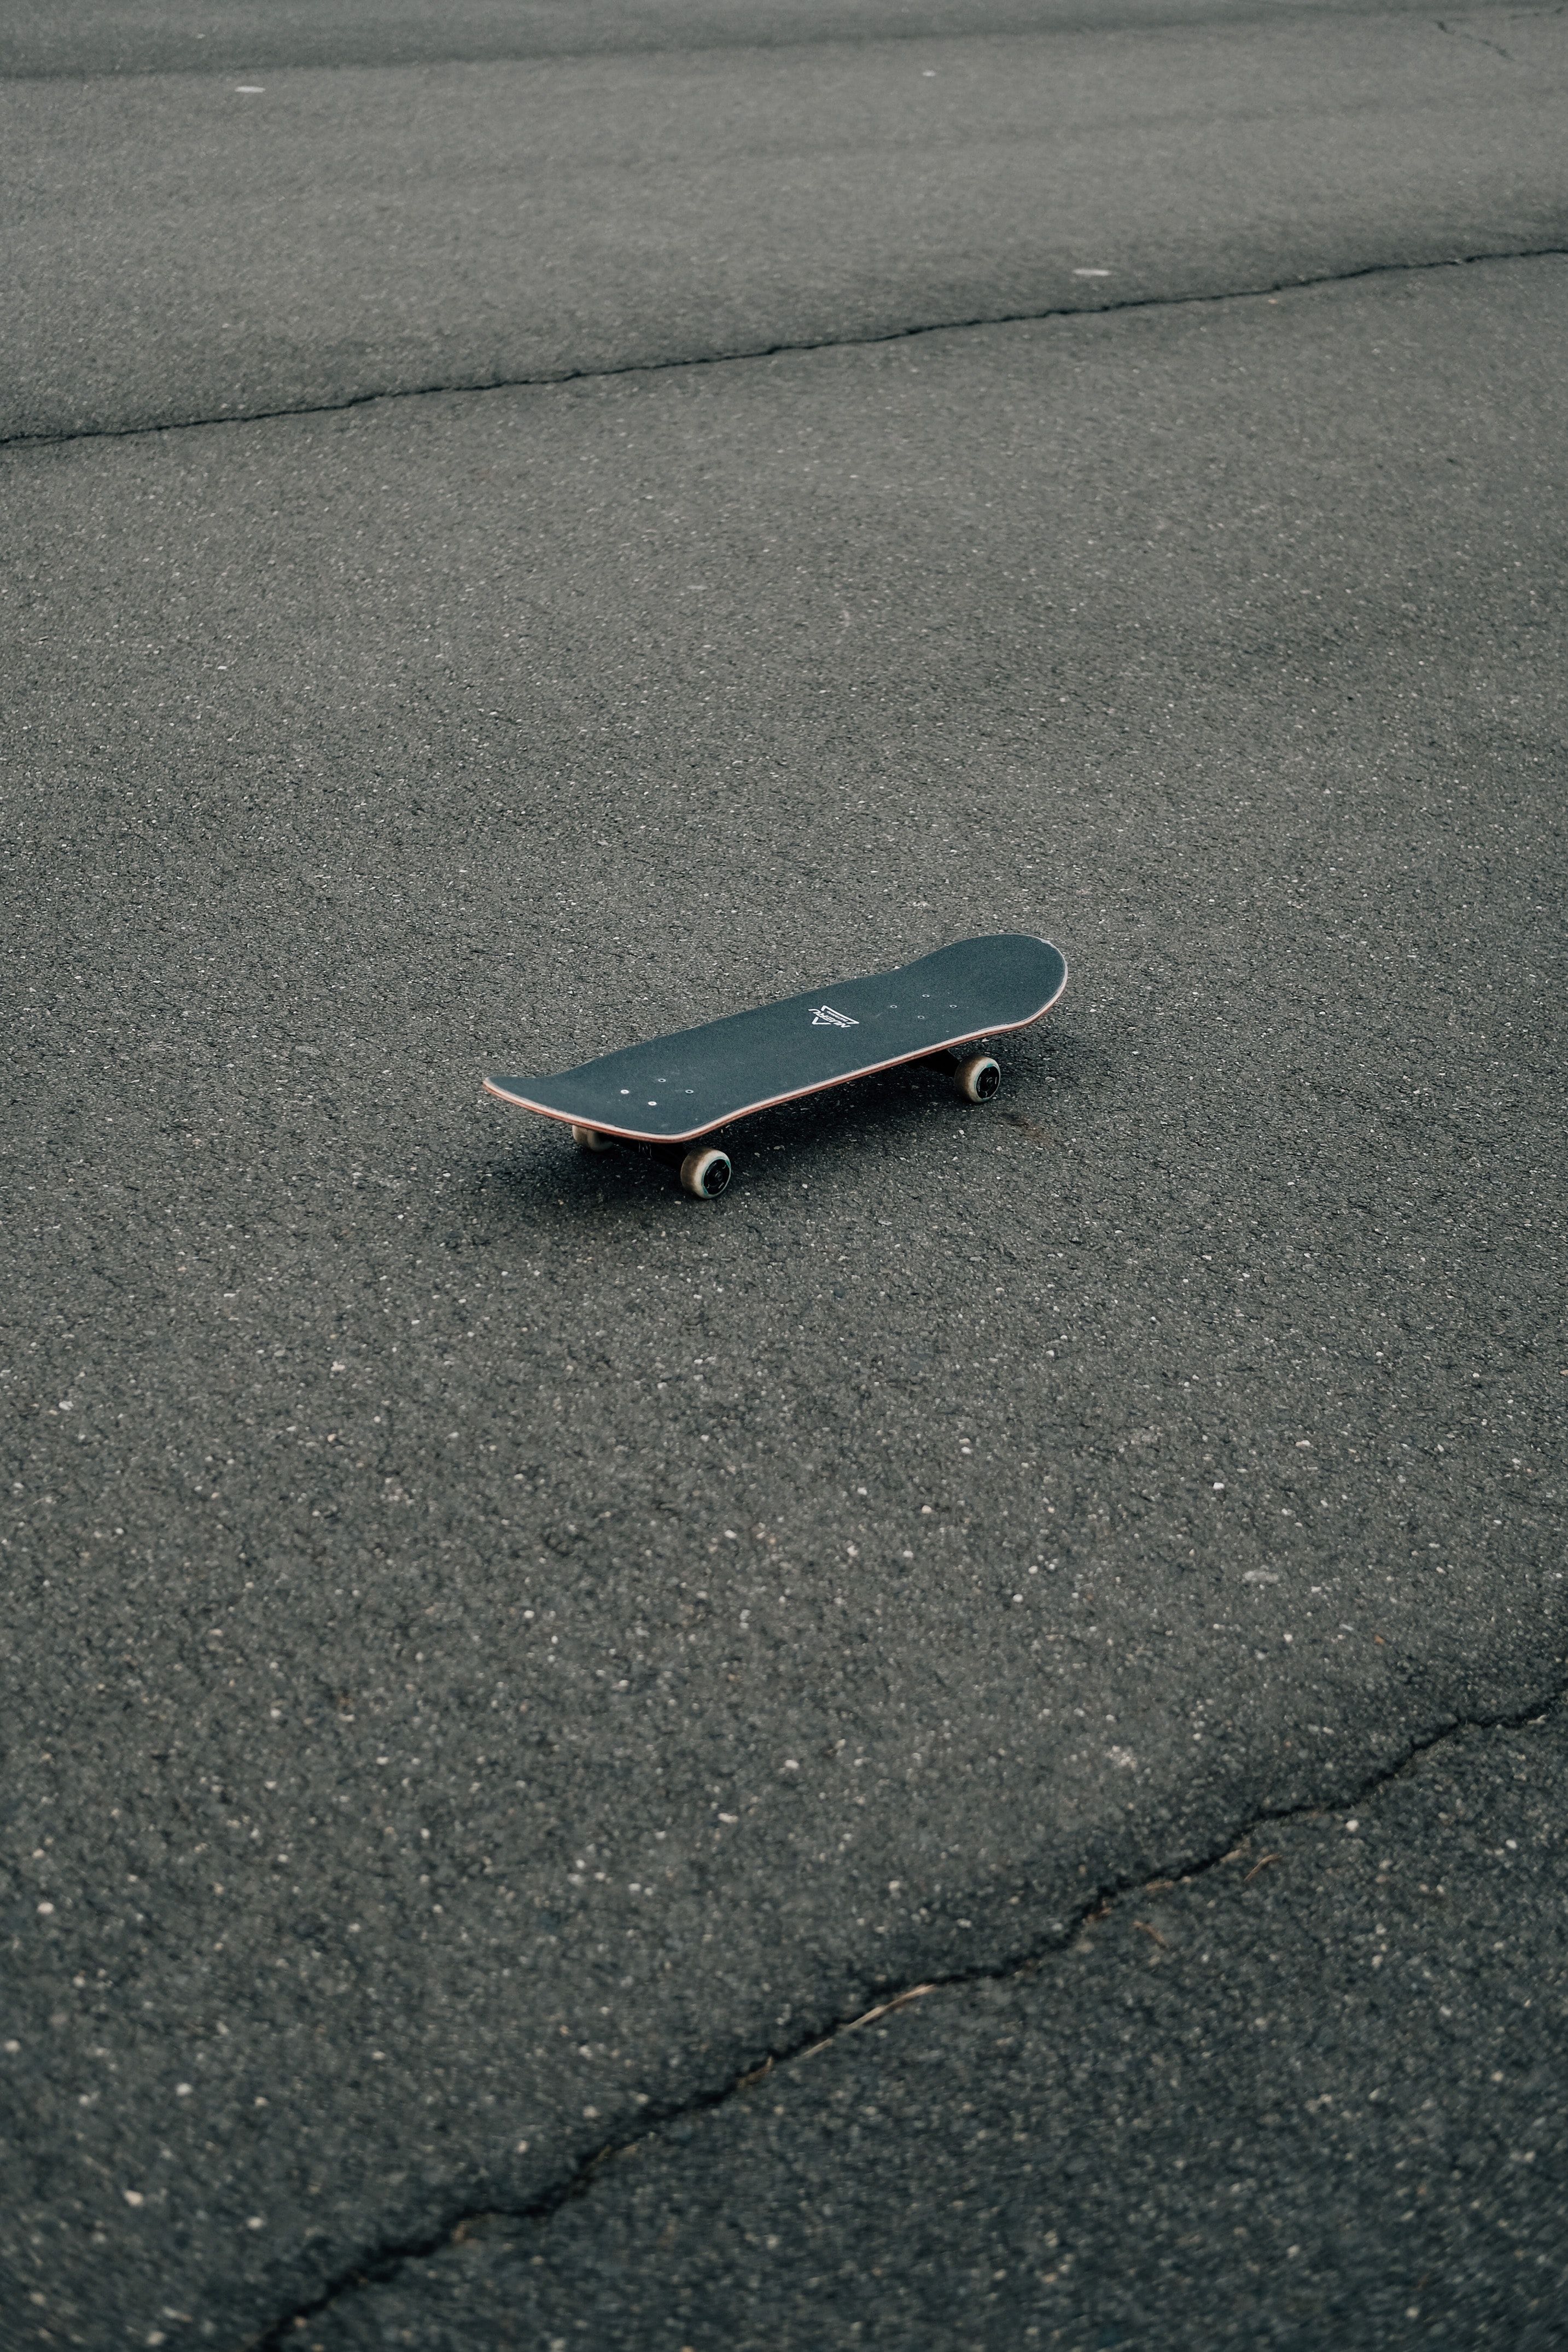 A skateboard sitting on the ground in an empty parking lot - Skate, skater